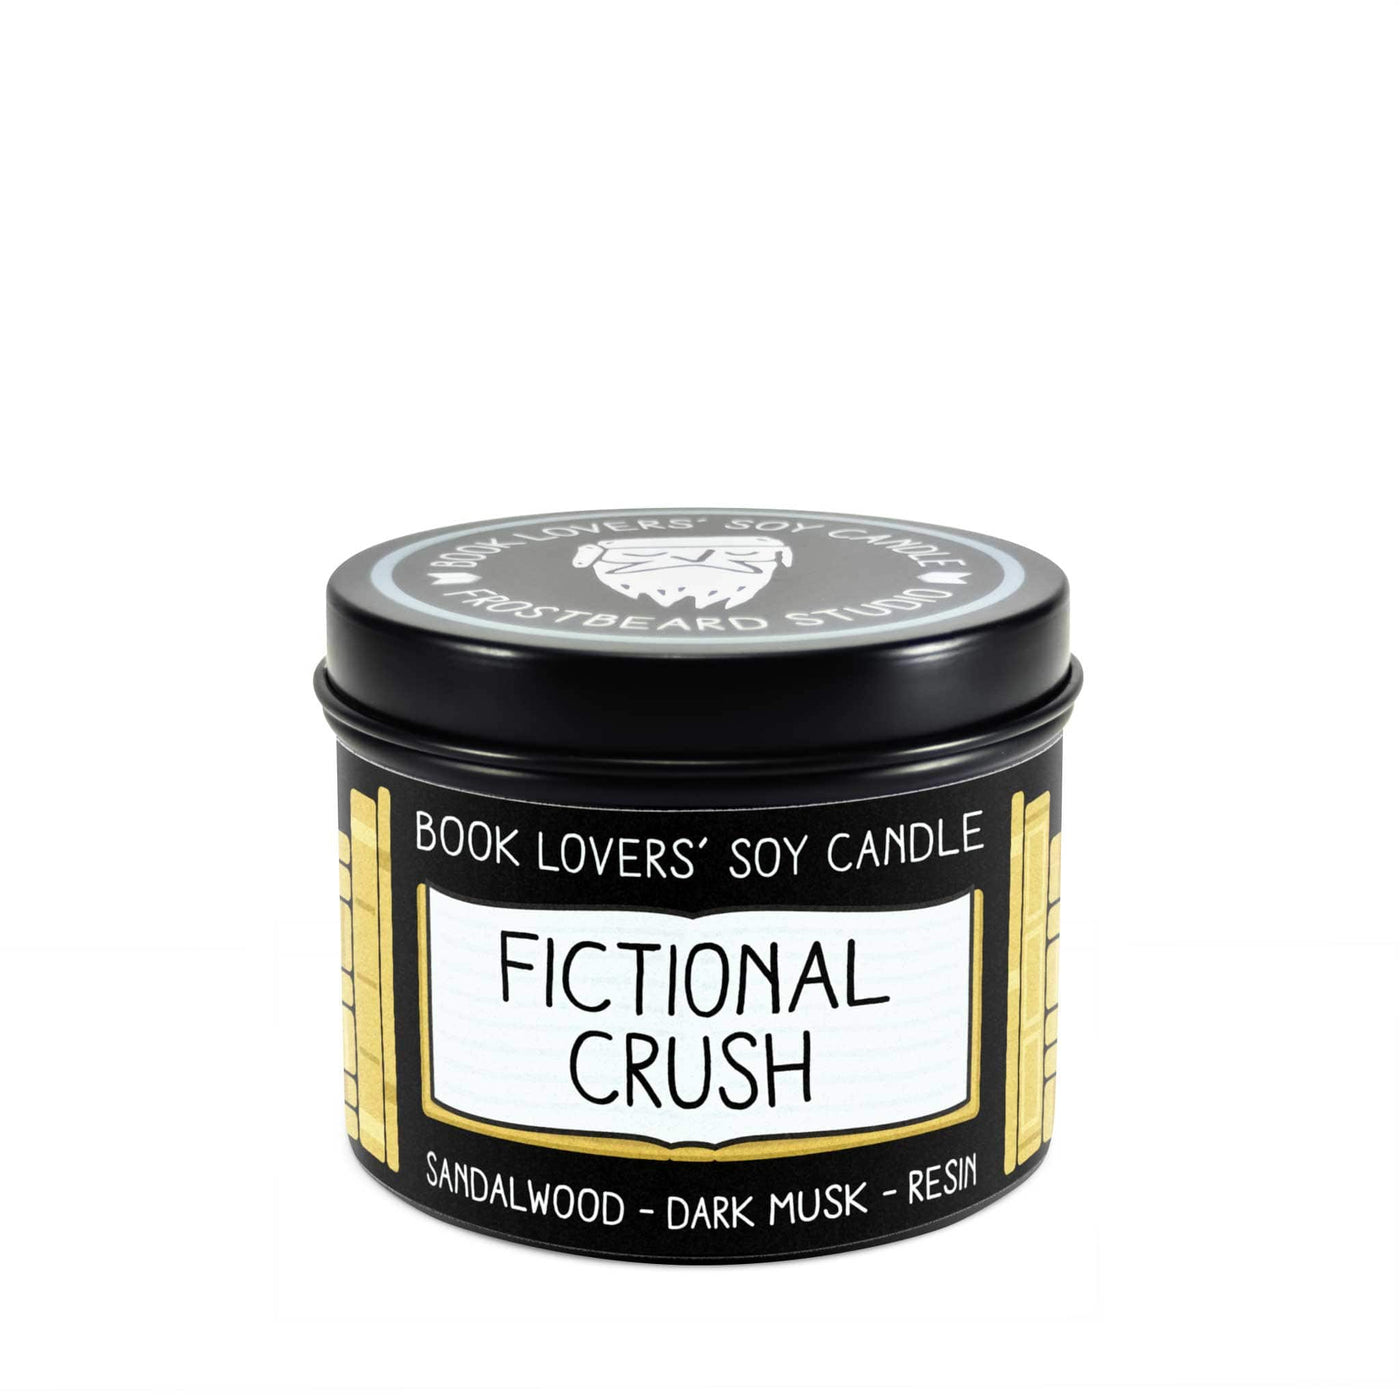 Fictional Crush  -  4 oz Tin  -  Book Lovers' Soy Candle  -  Frostbeard Studio